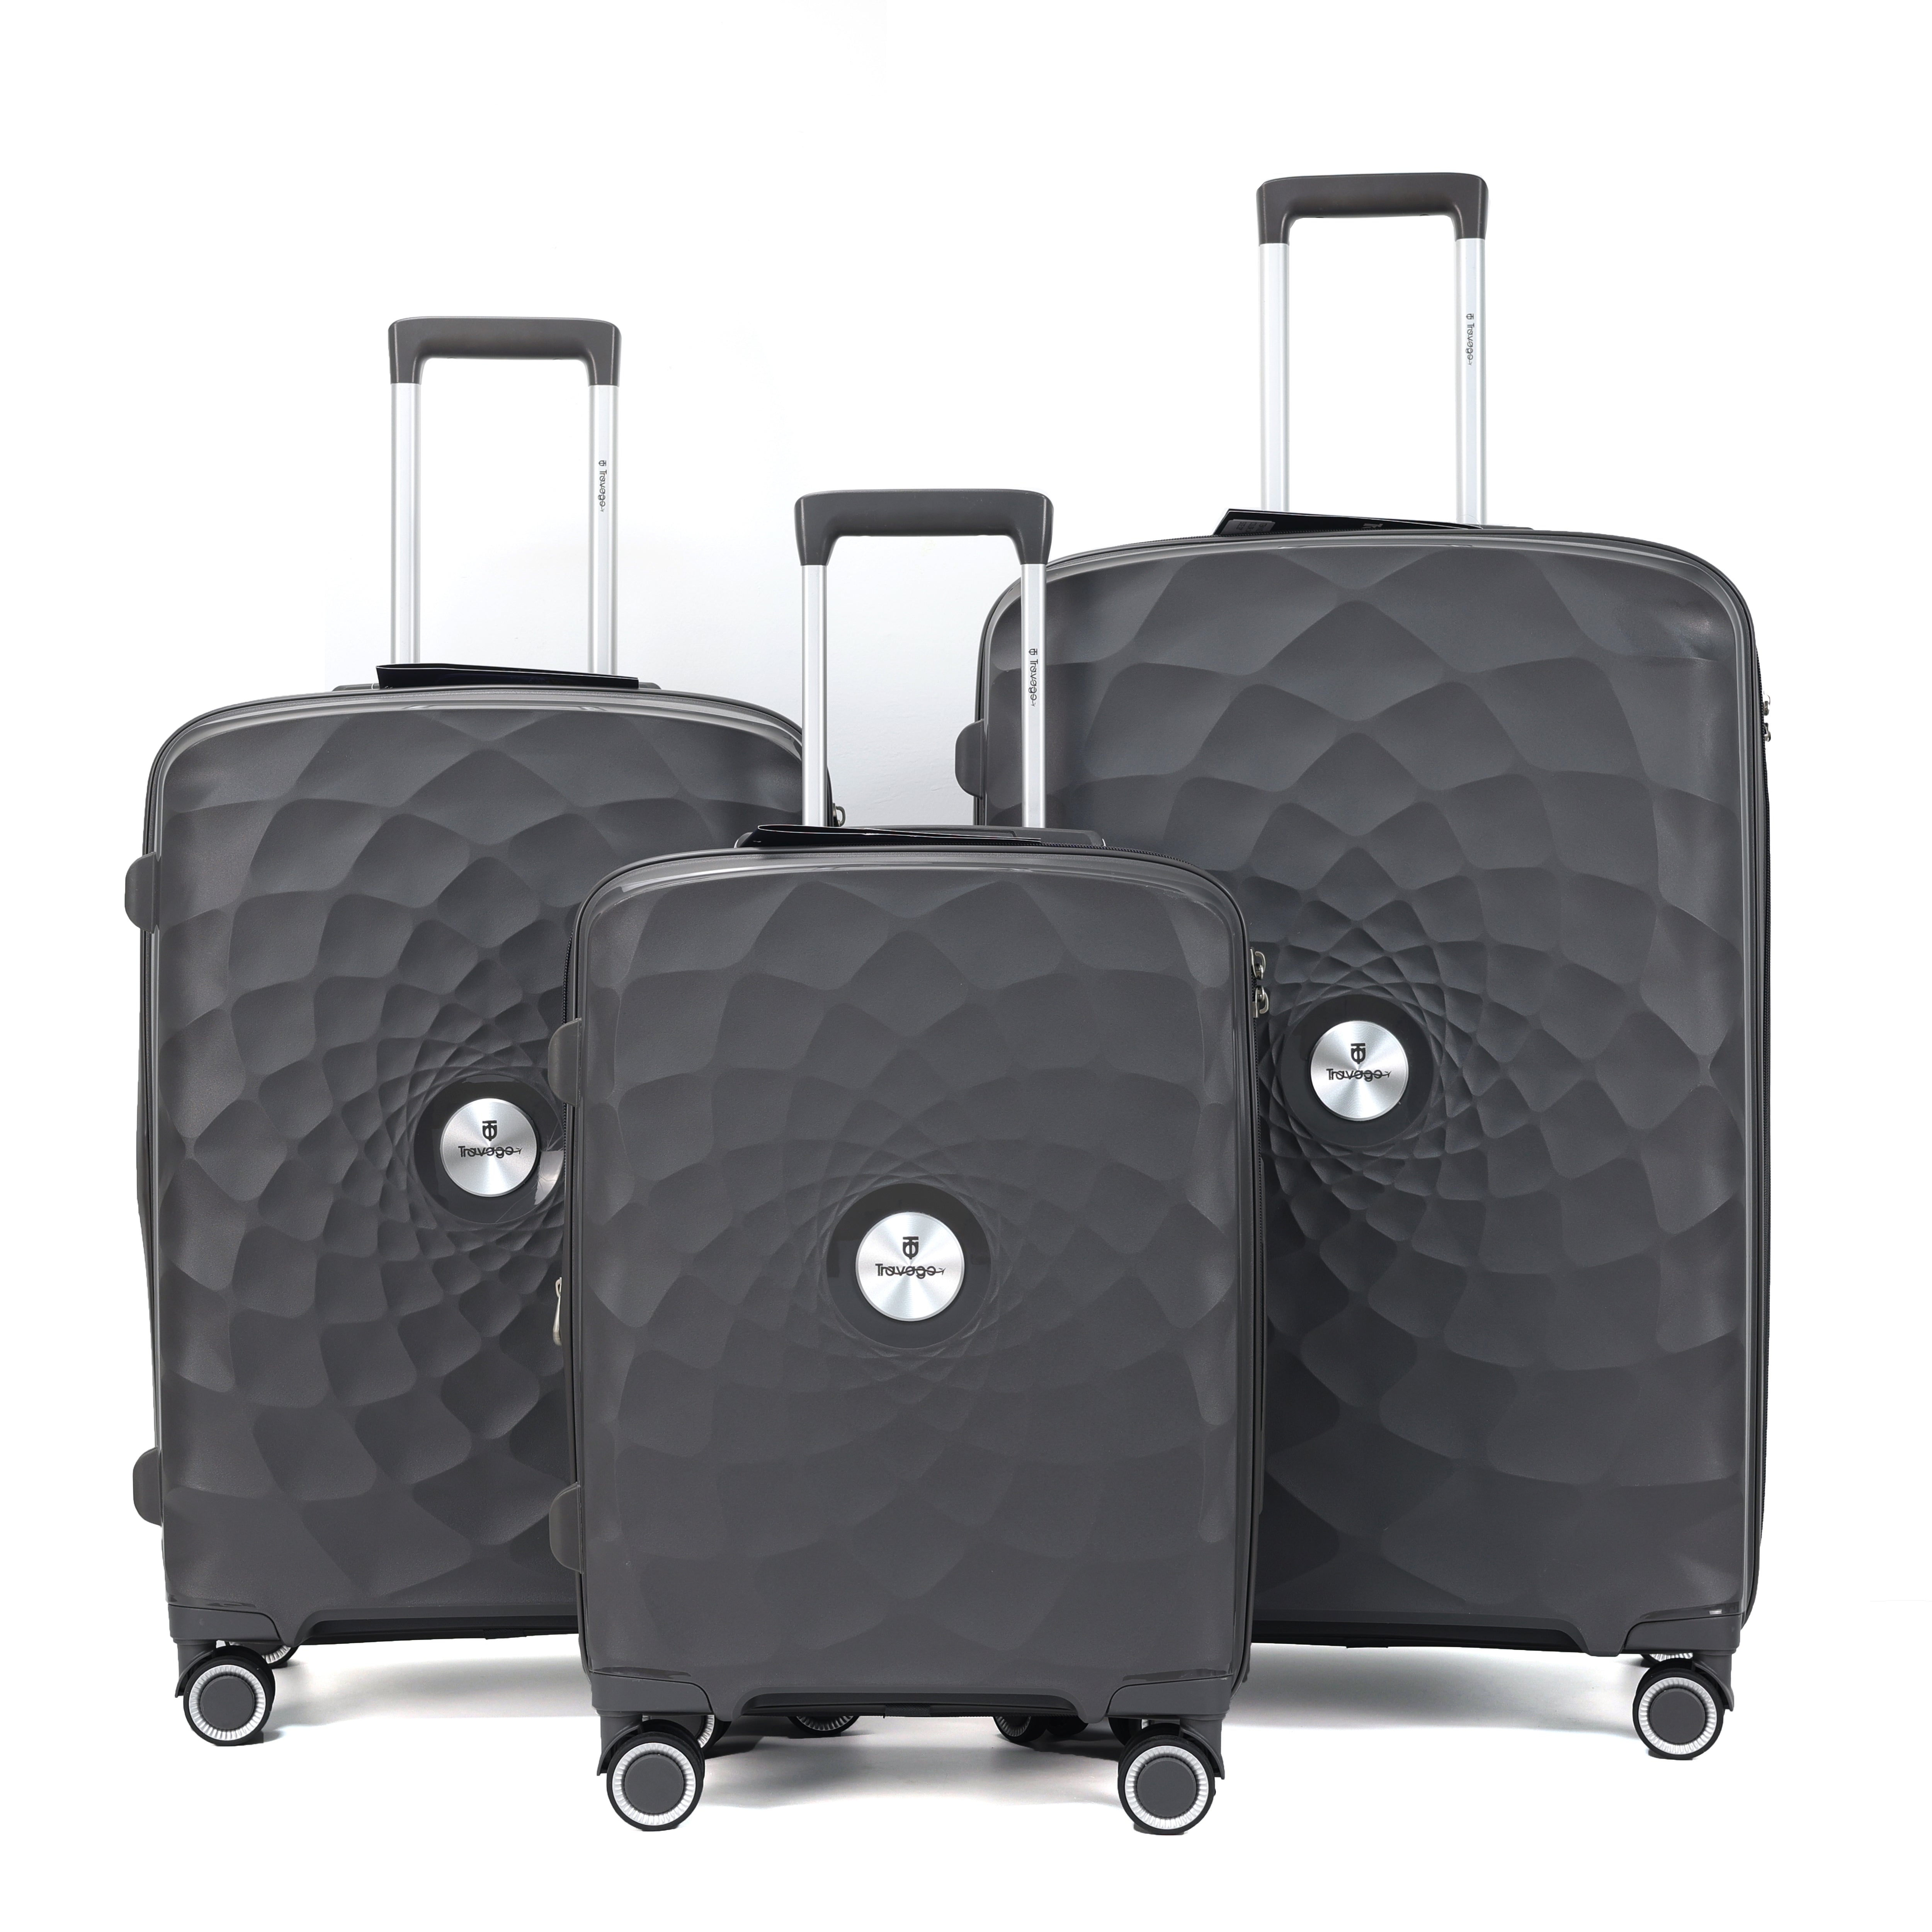 TravagoSpider Lilly Suitcase - Grey